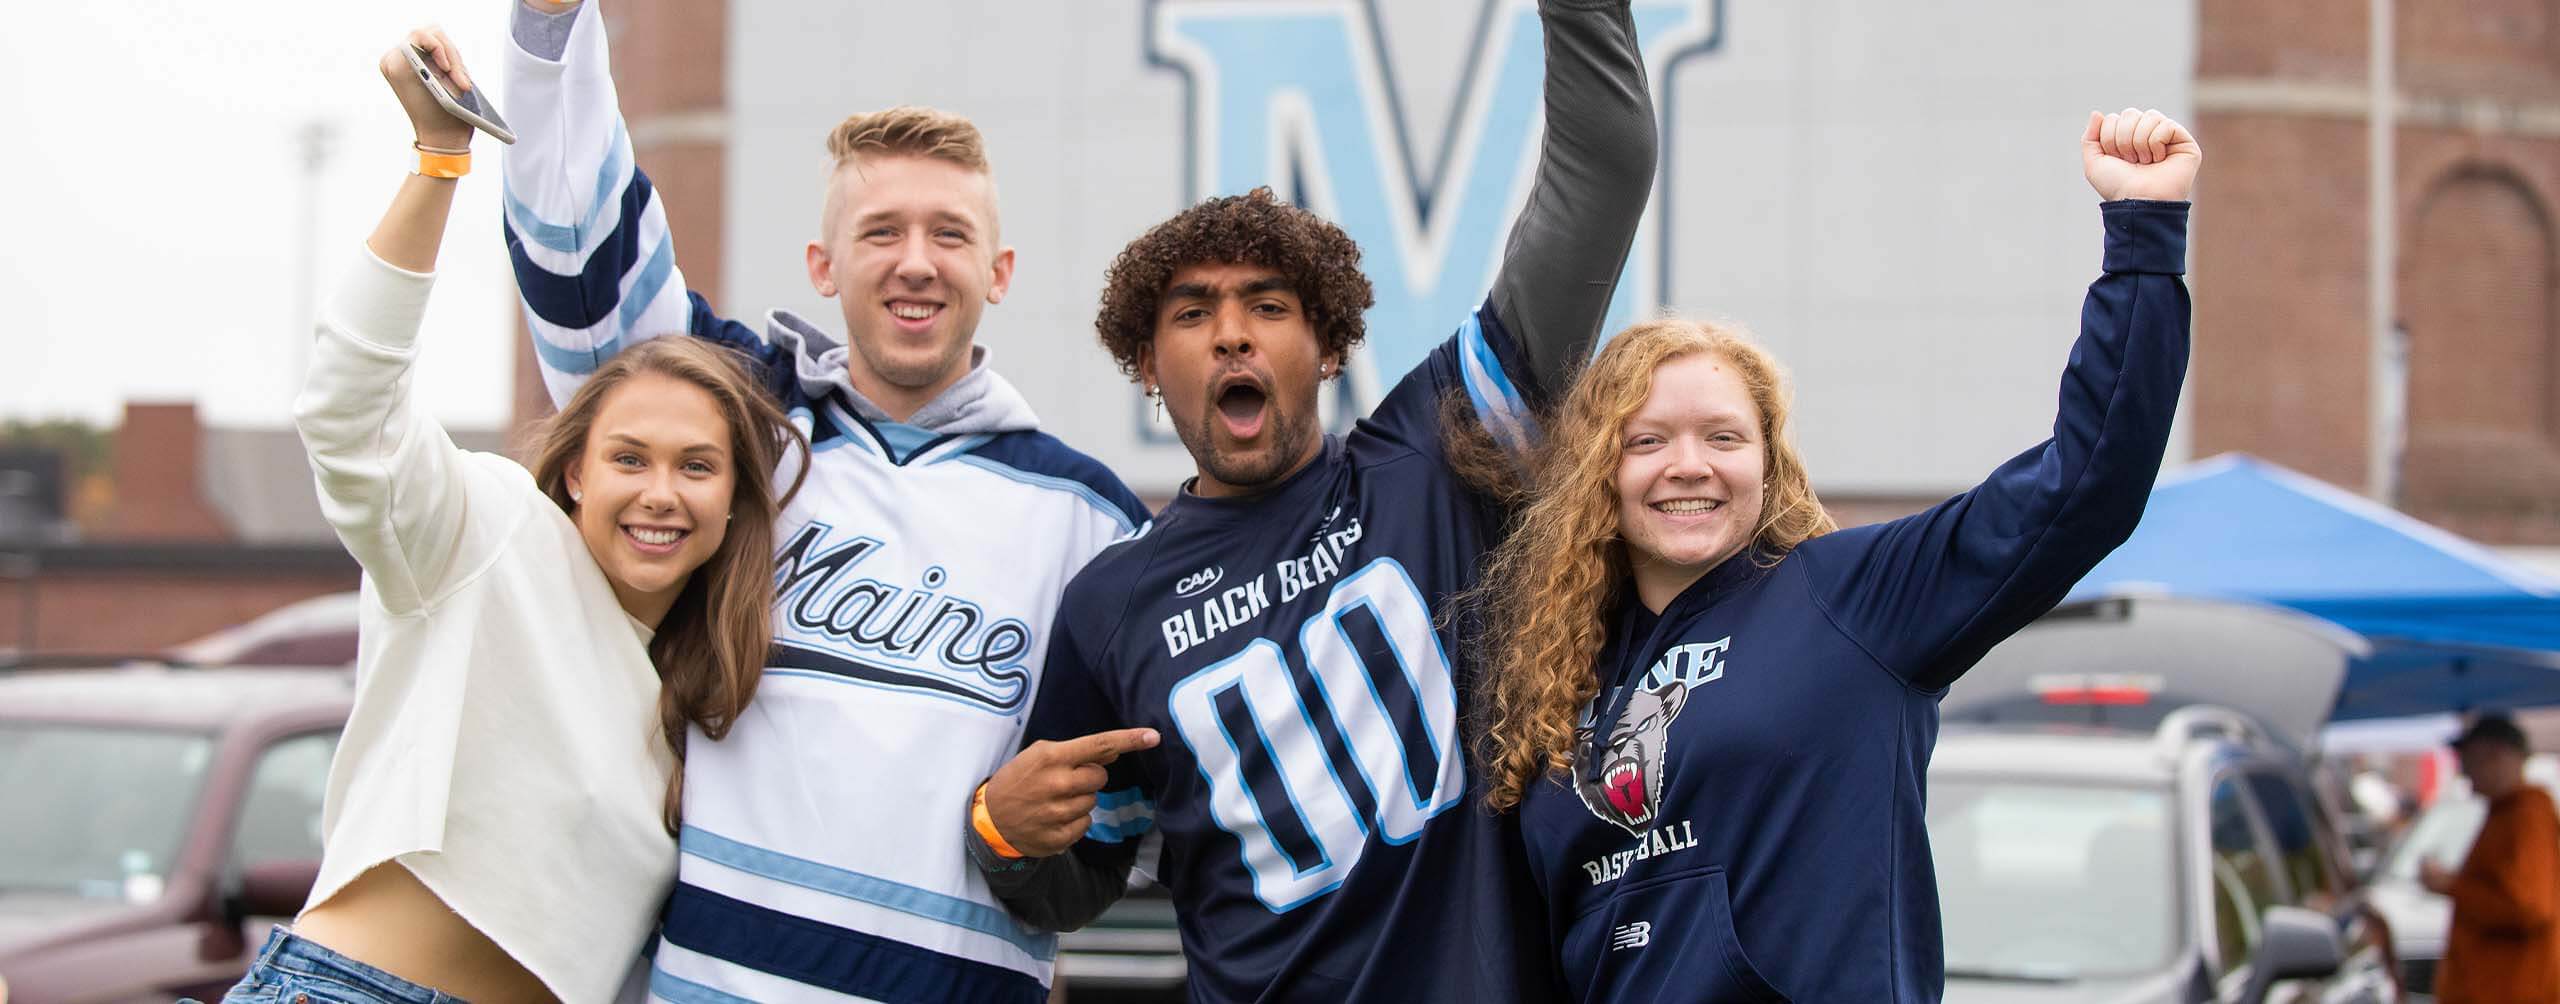 A photo of four people at tailgating before a football game